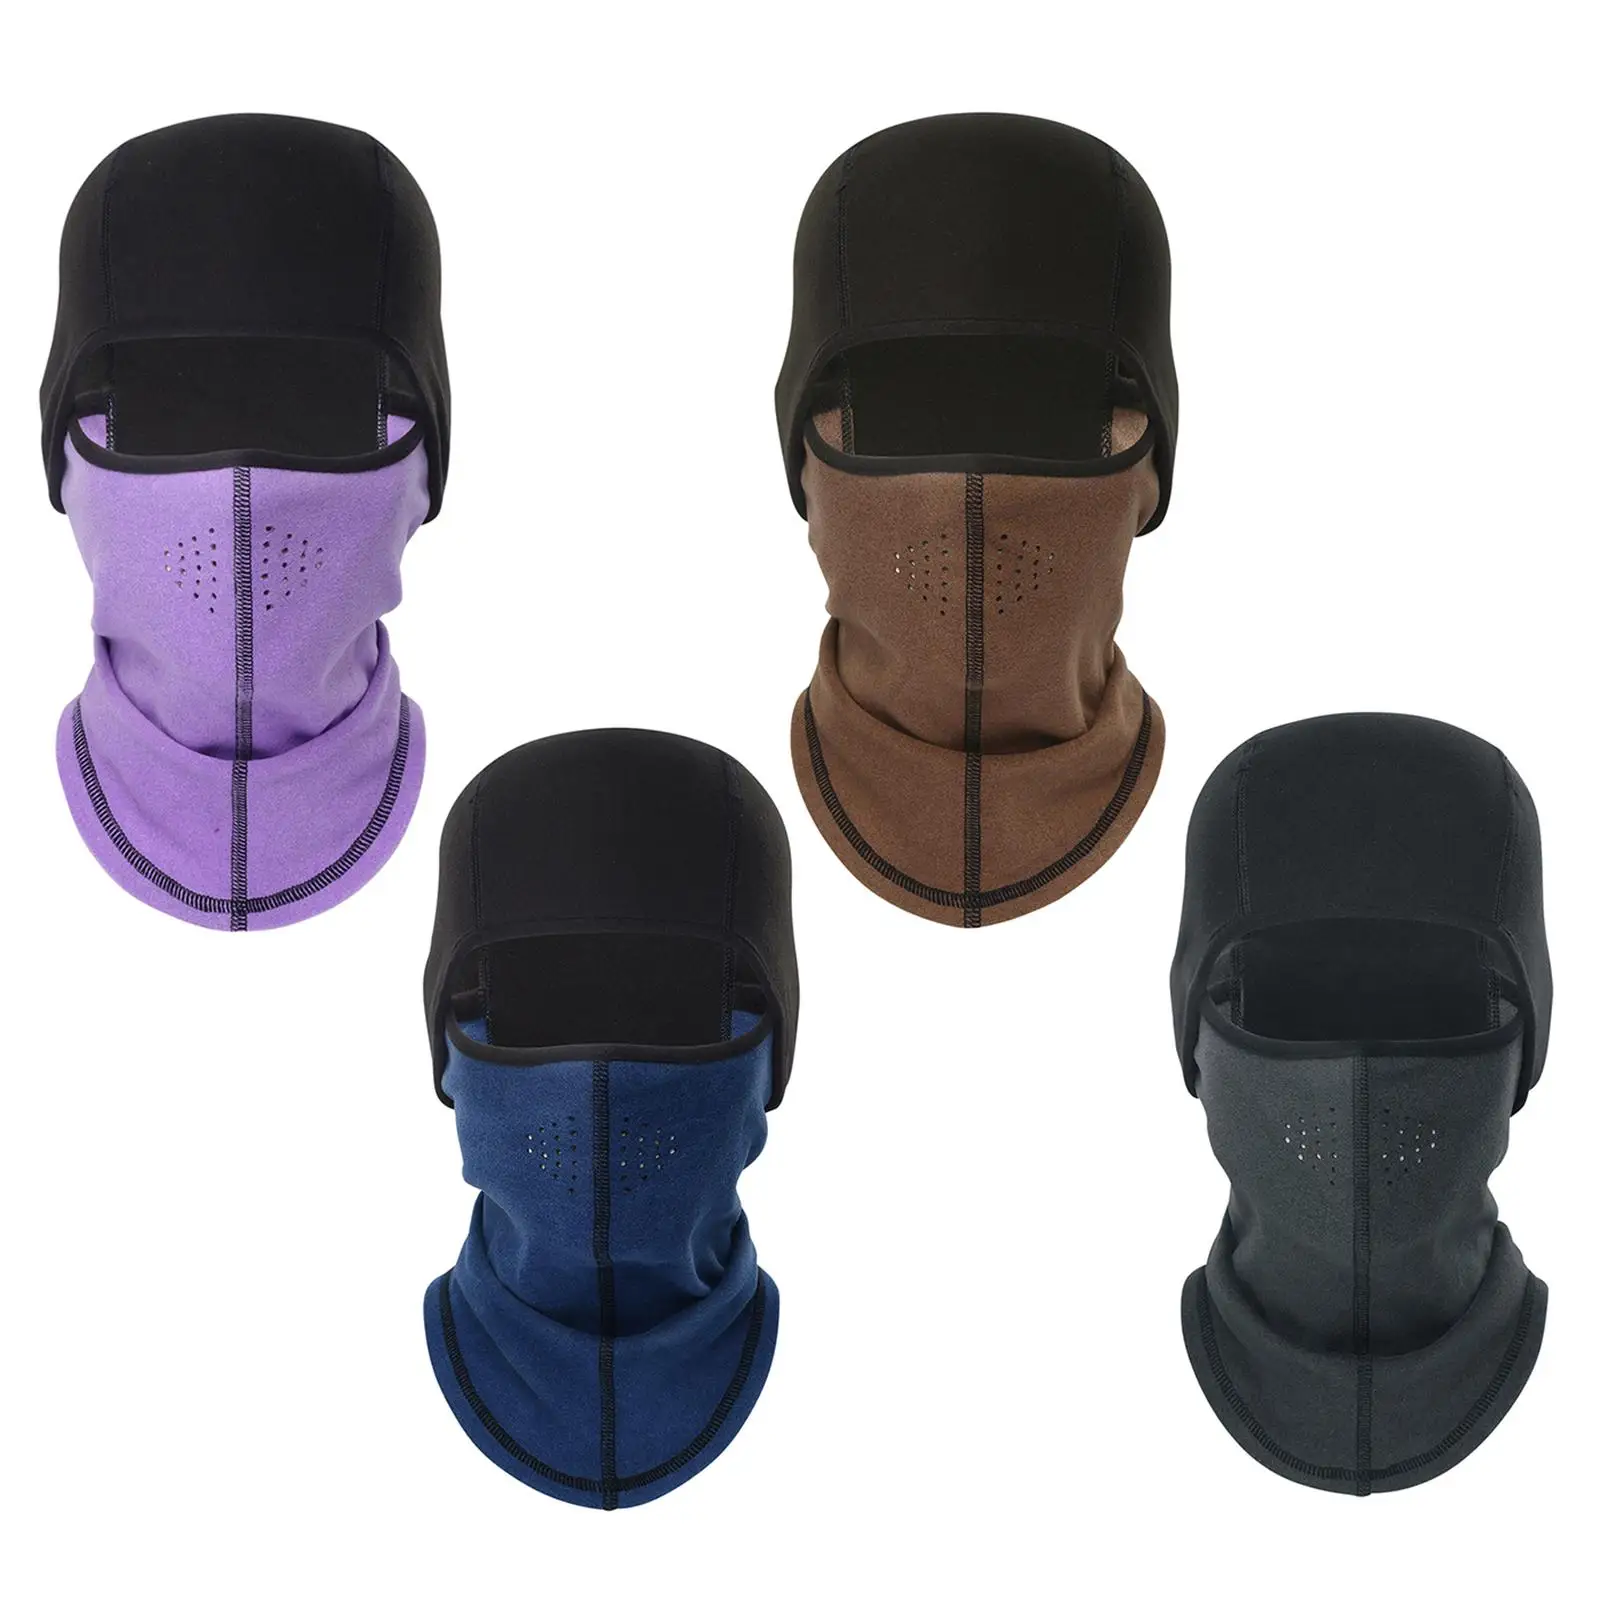 Face Cover Winter Balaclava Ski Mask for Motorcycle Climbing Outdoor Sports